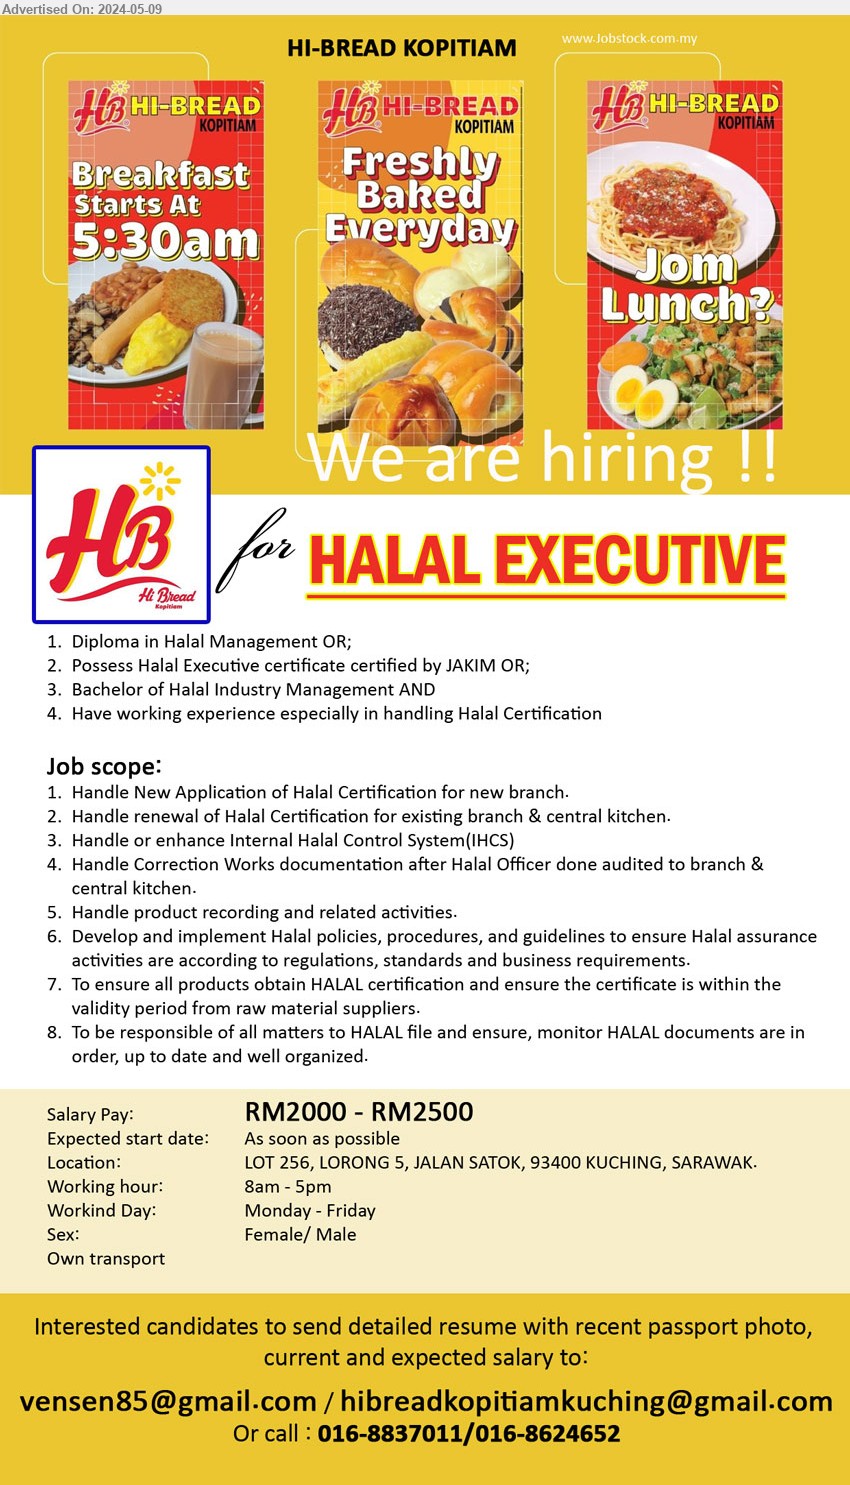 HI-BREAD KOPITIAM - HALAL EXECUTIVE (Kuching), RM2000 - RM2500, Diploma in Halal Management OR; Possess Halal Executive certificate certified by JAKIM OR; Bachelor of Halal Industry Management, Have working experience especially in handling Halal Certification...
Email resume to ...